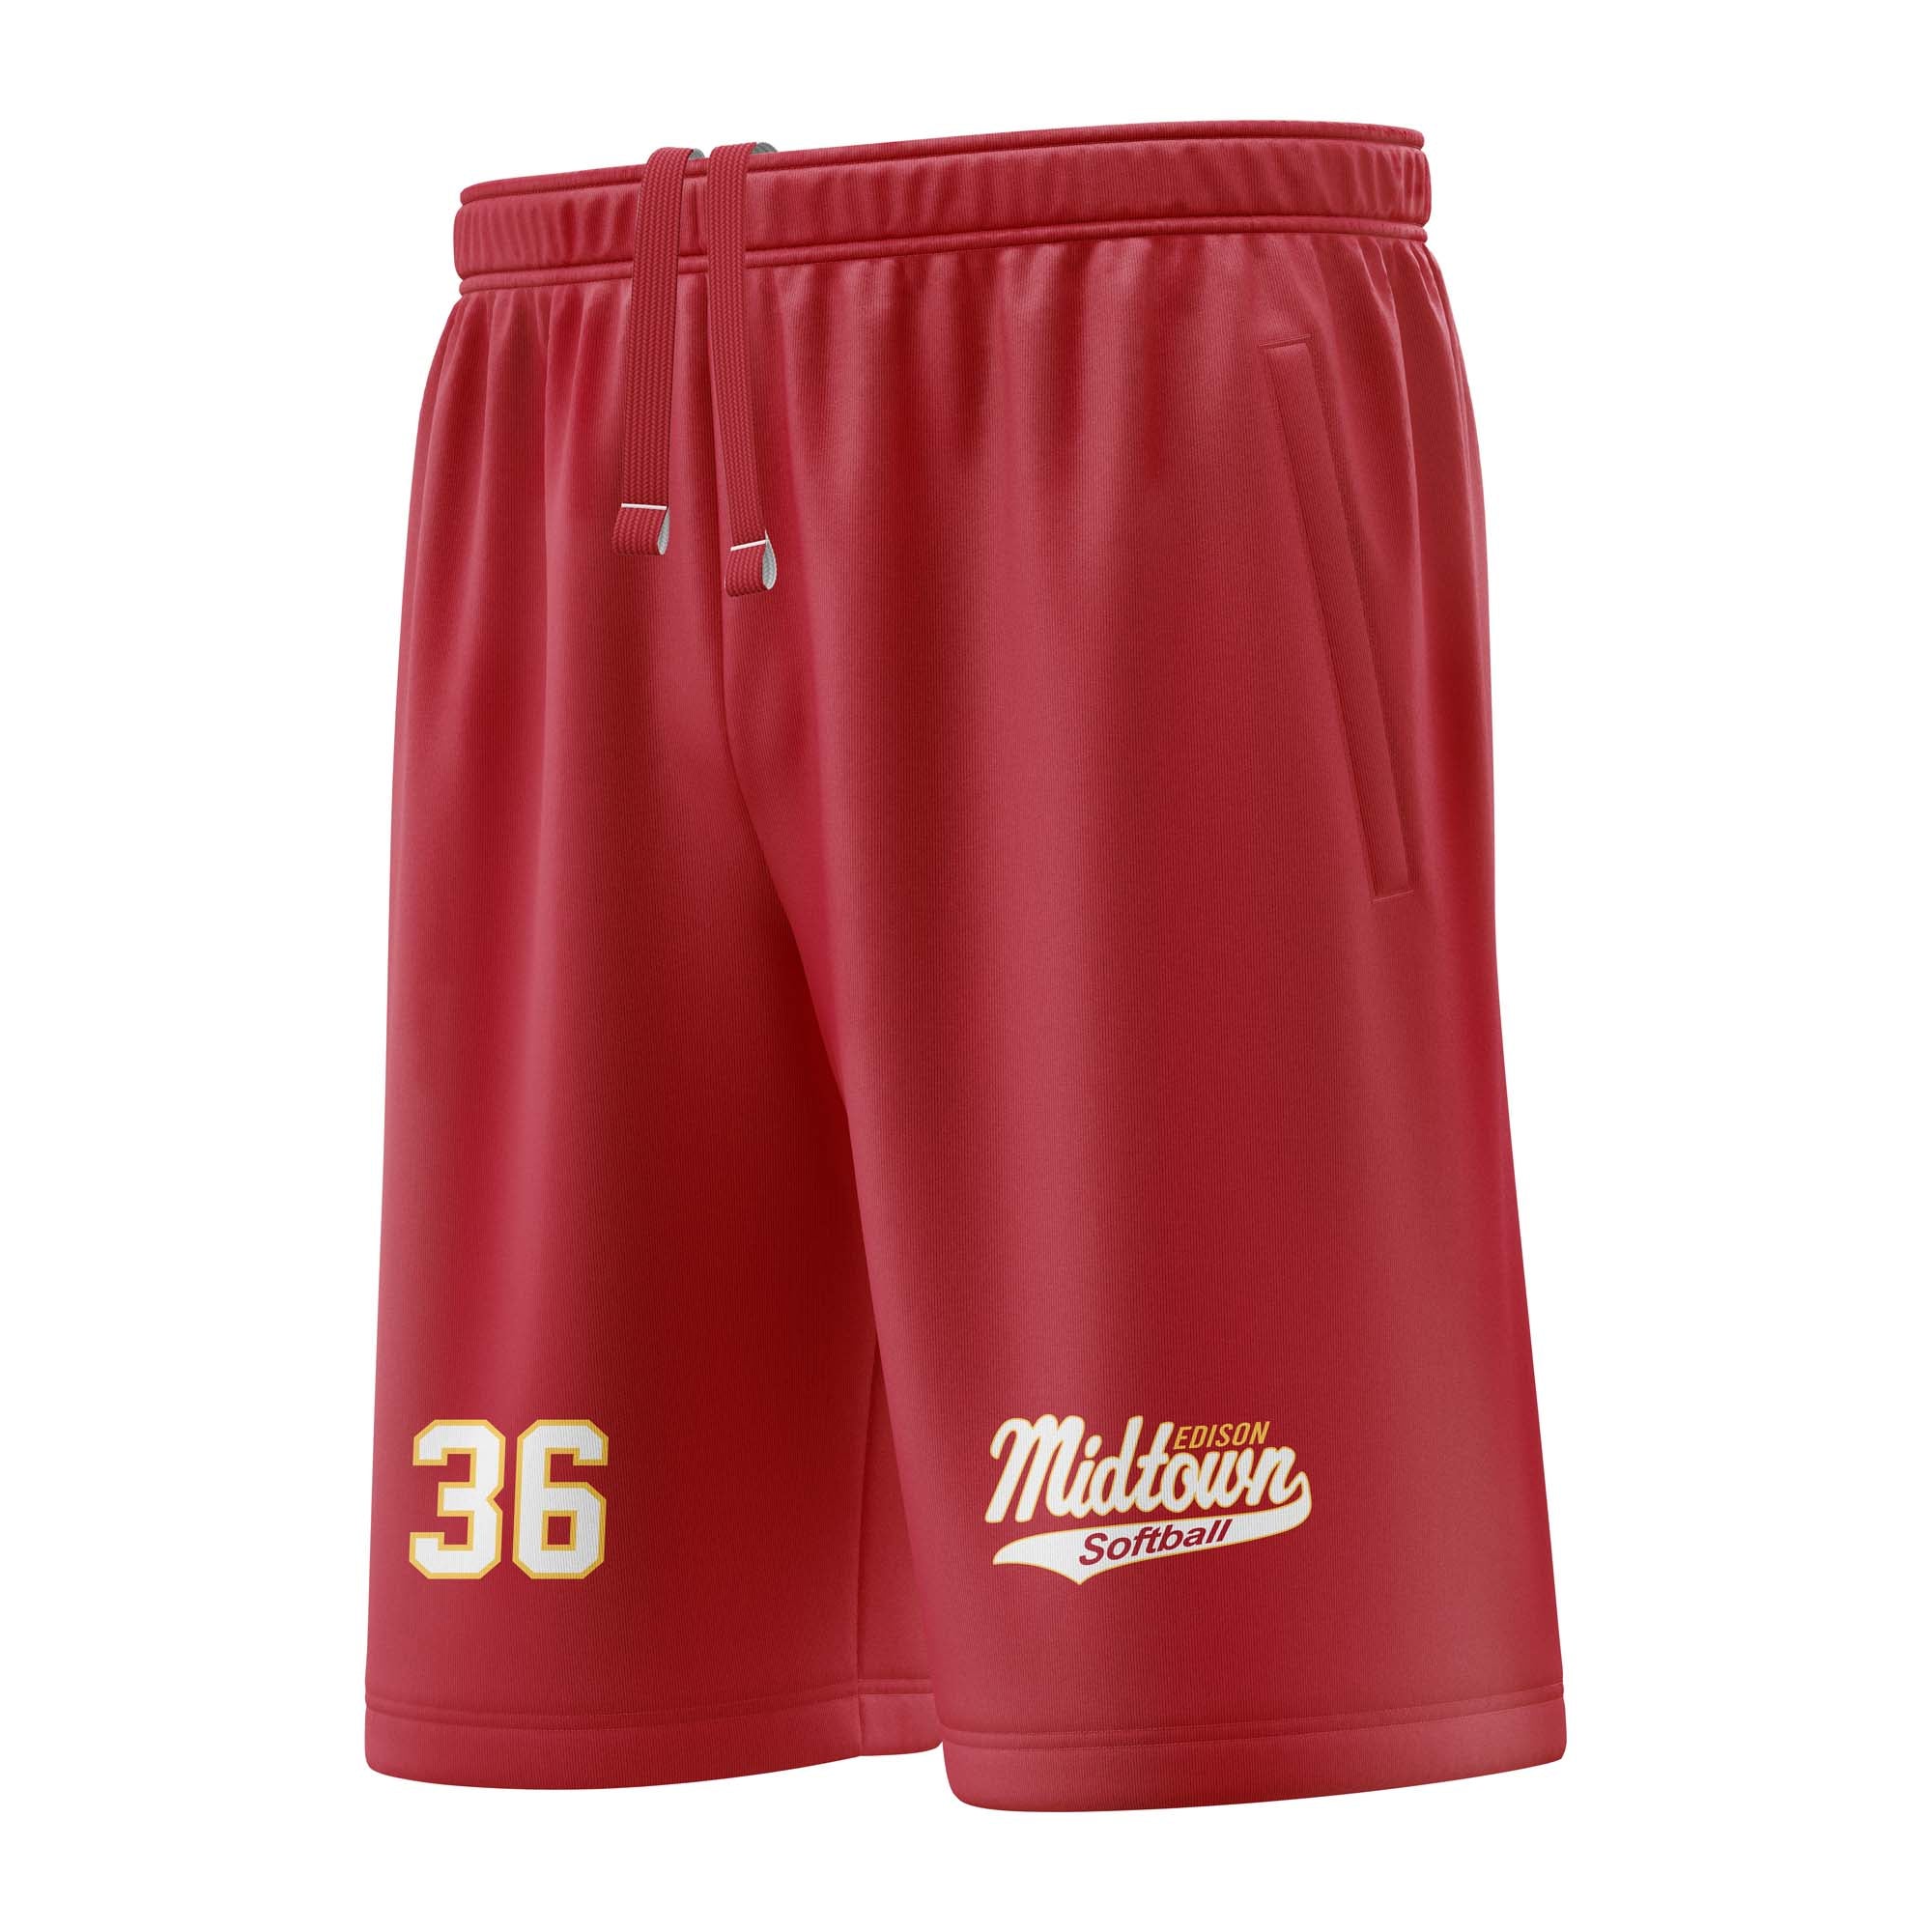 Edison Midtown SHORTS WITH POCKETS